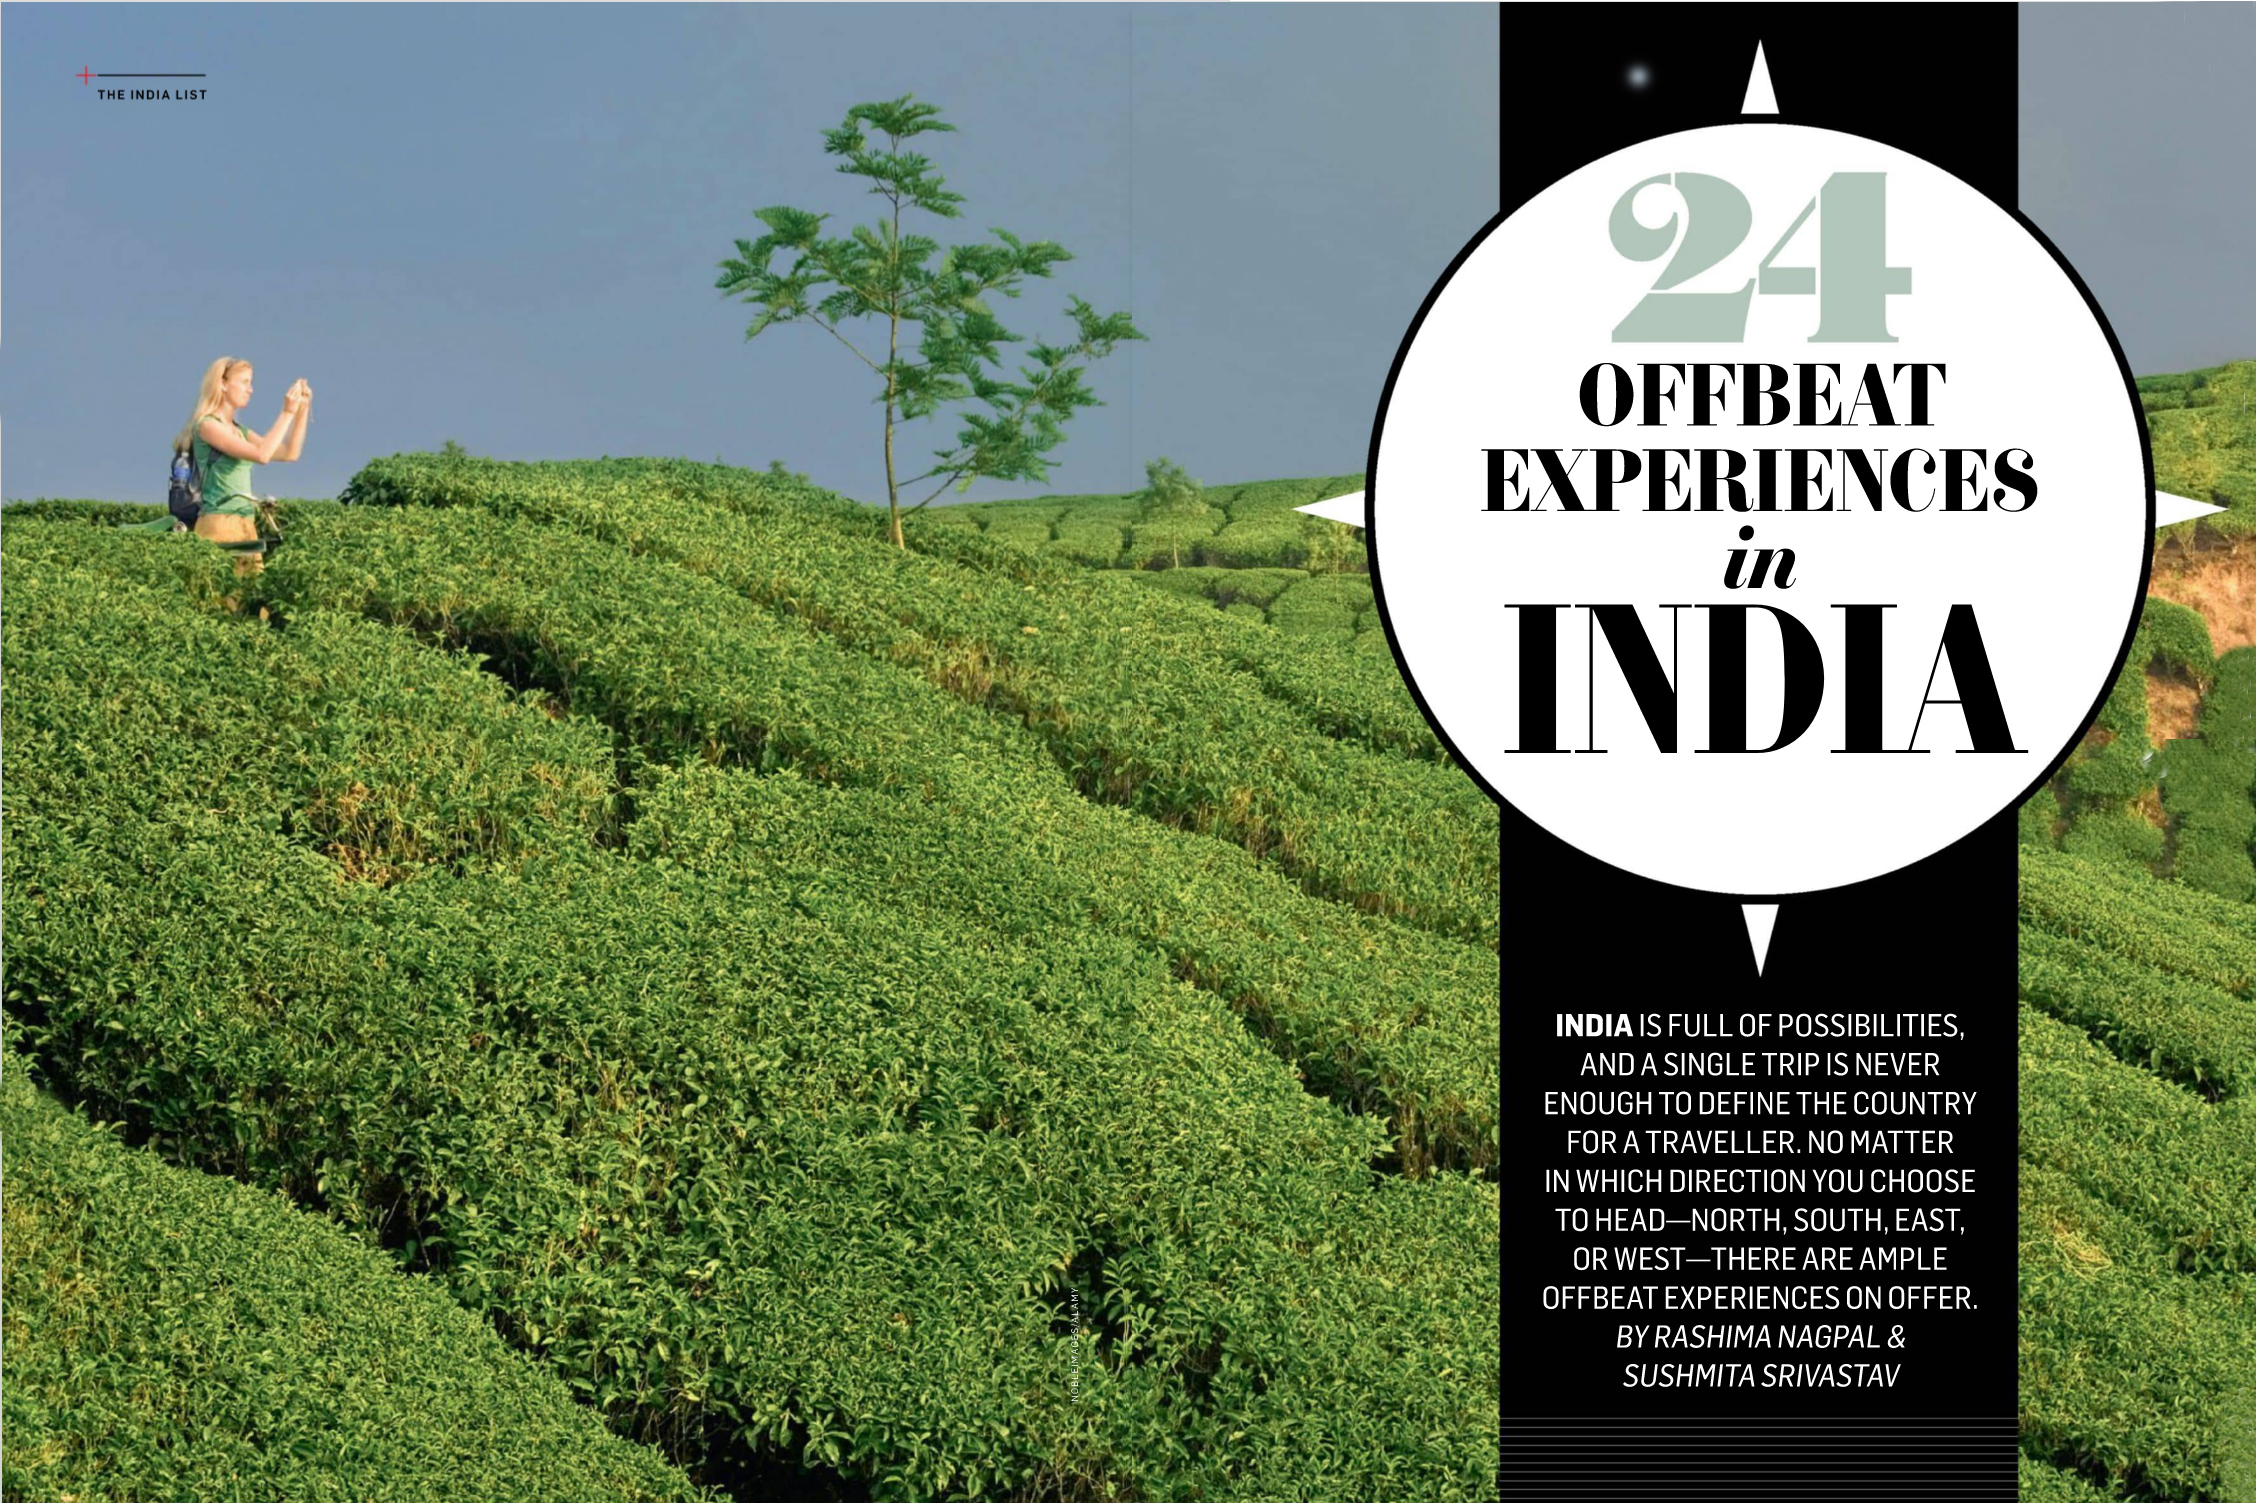 Travel+Leisure India (Part 1) August 2019 Issue